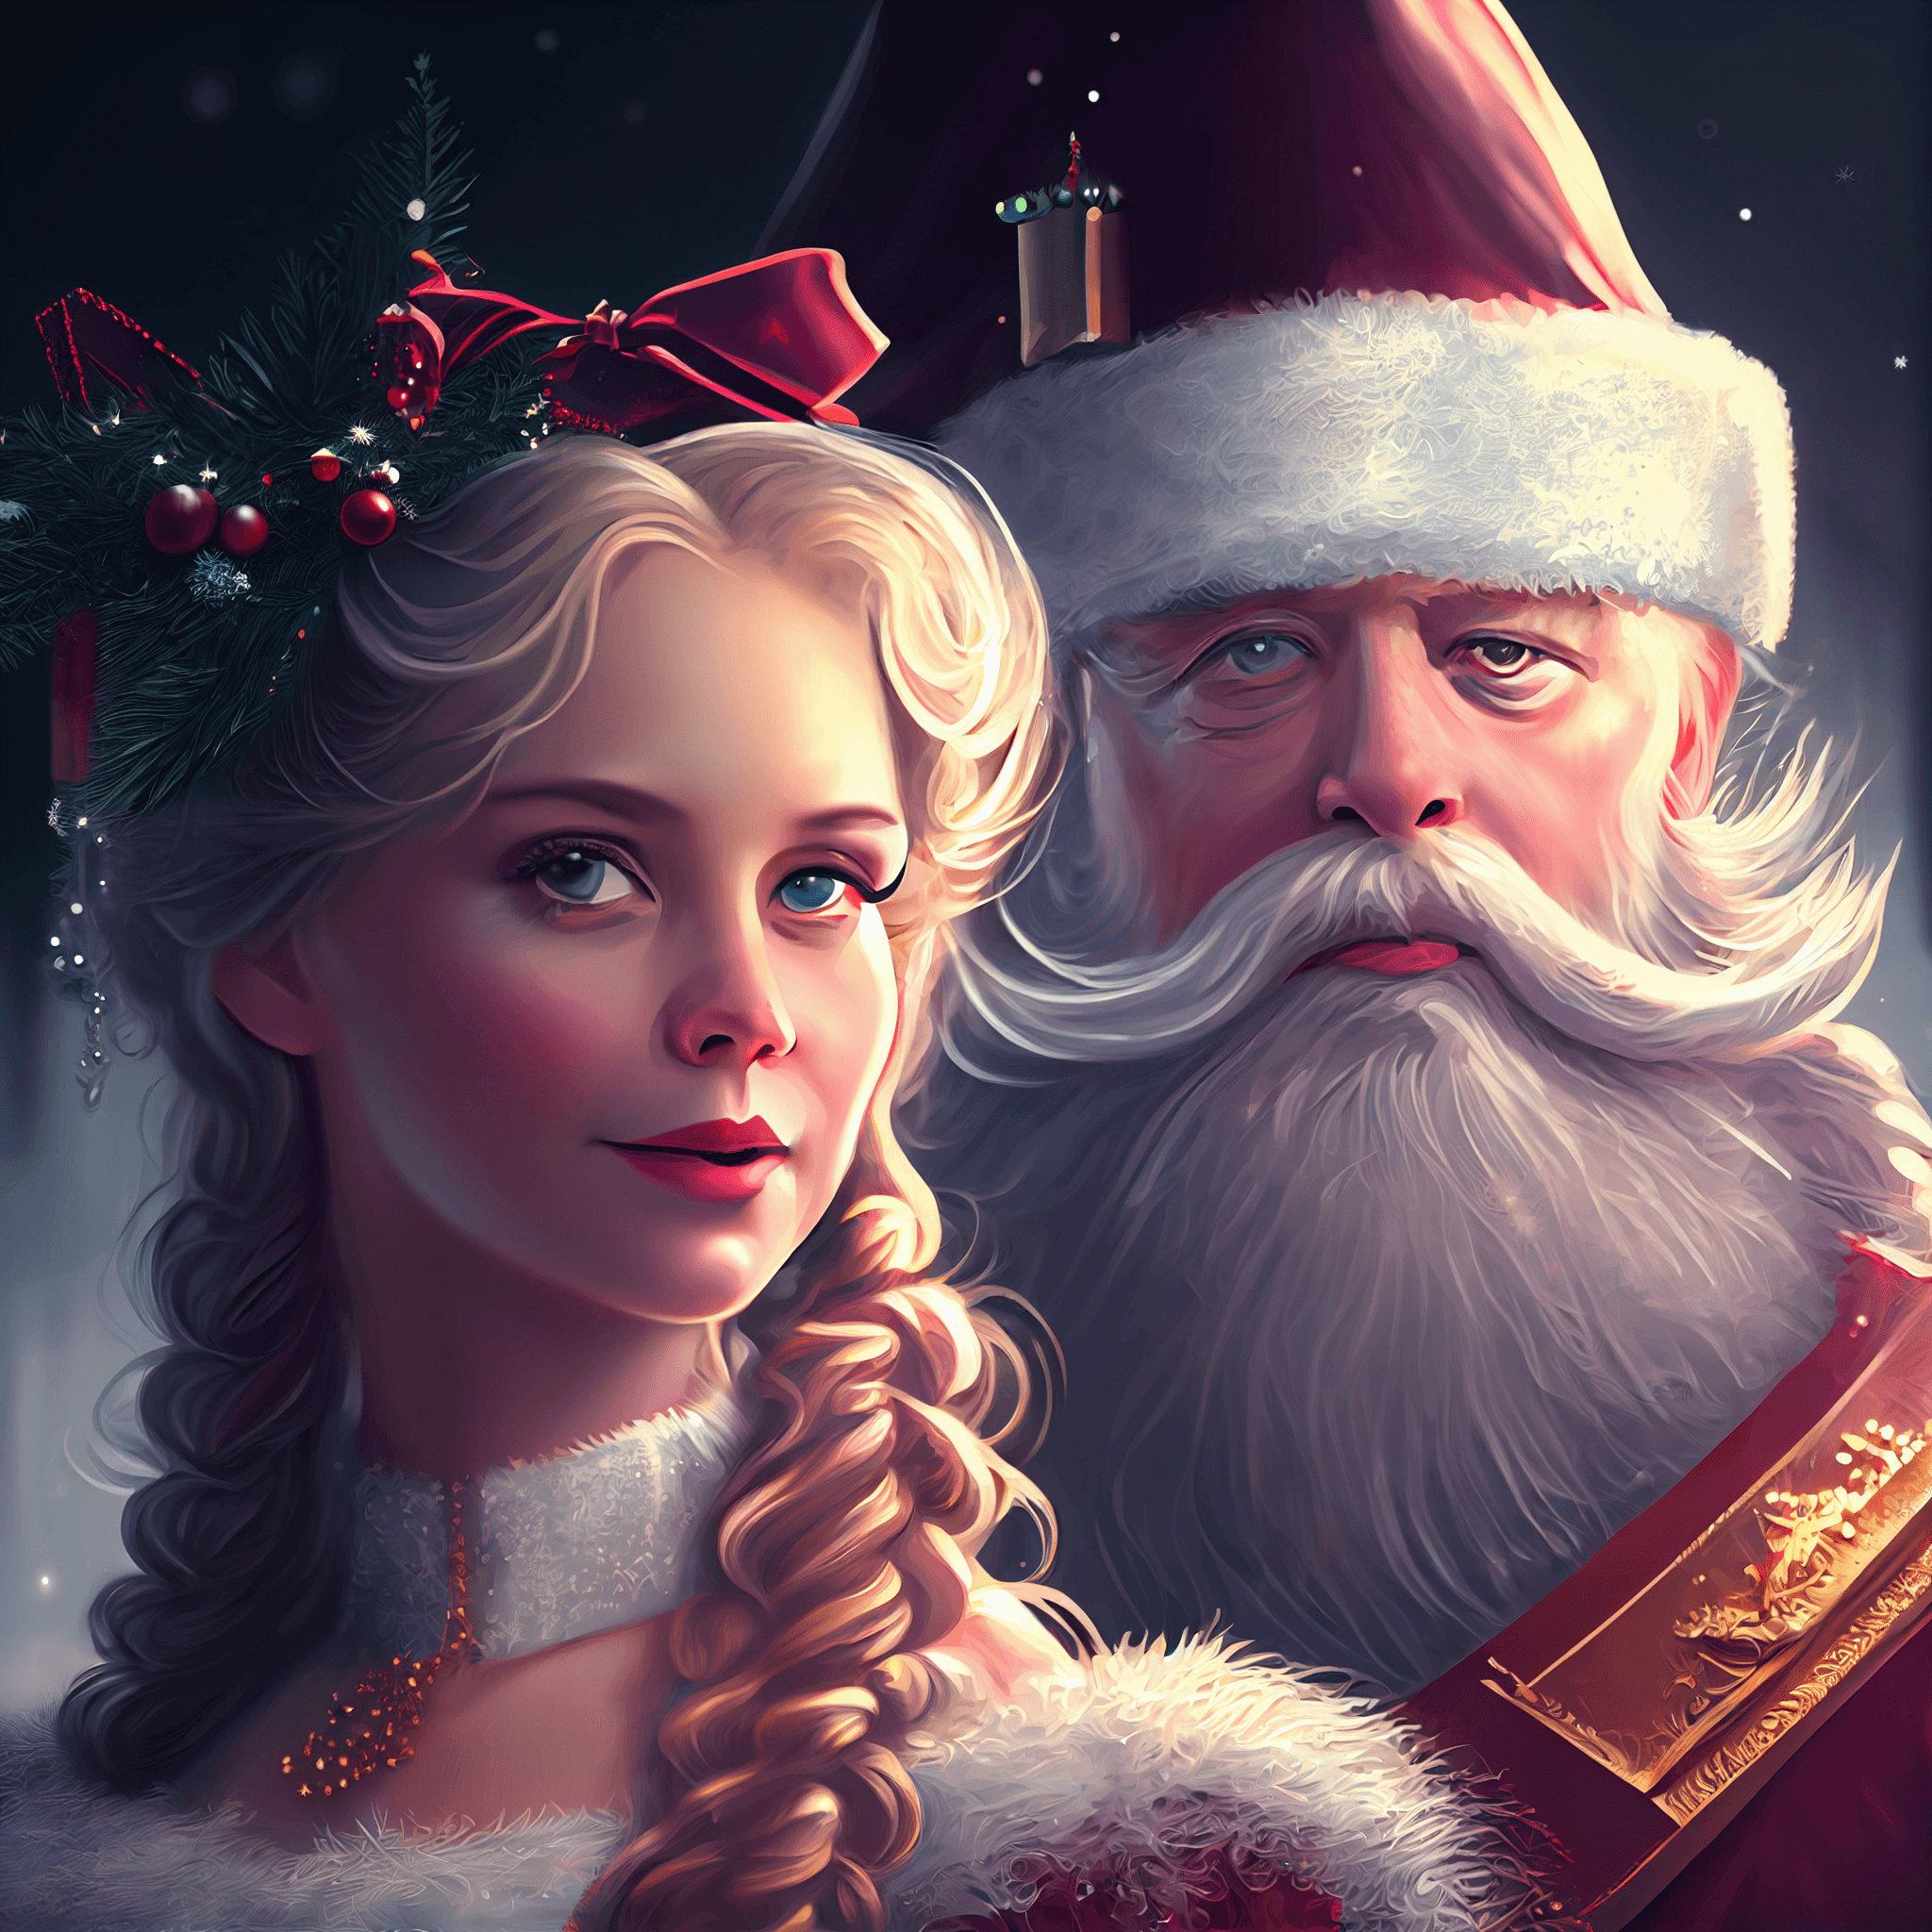 🎅 💃 A Beautiful Queen and Santa Claus 🎄 🎅